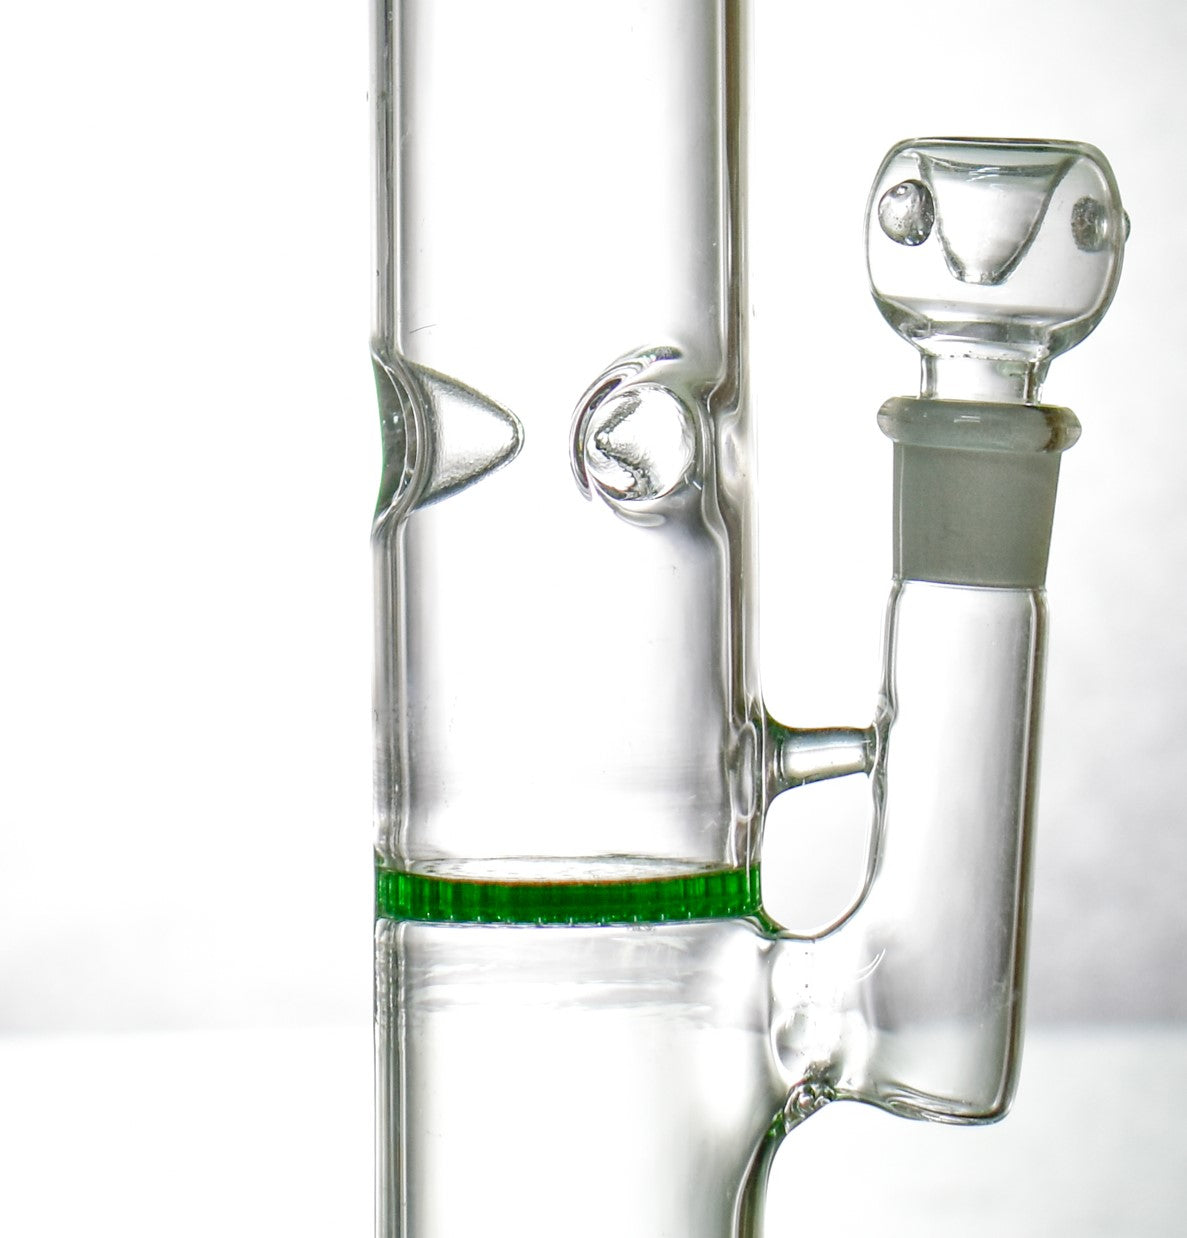 14 Inch Straight Tube Assorted Colors Bong with Ice Catcher and Honeycomb Percolator (Discontinued)